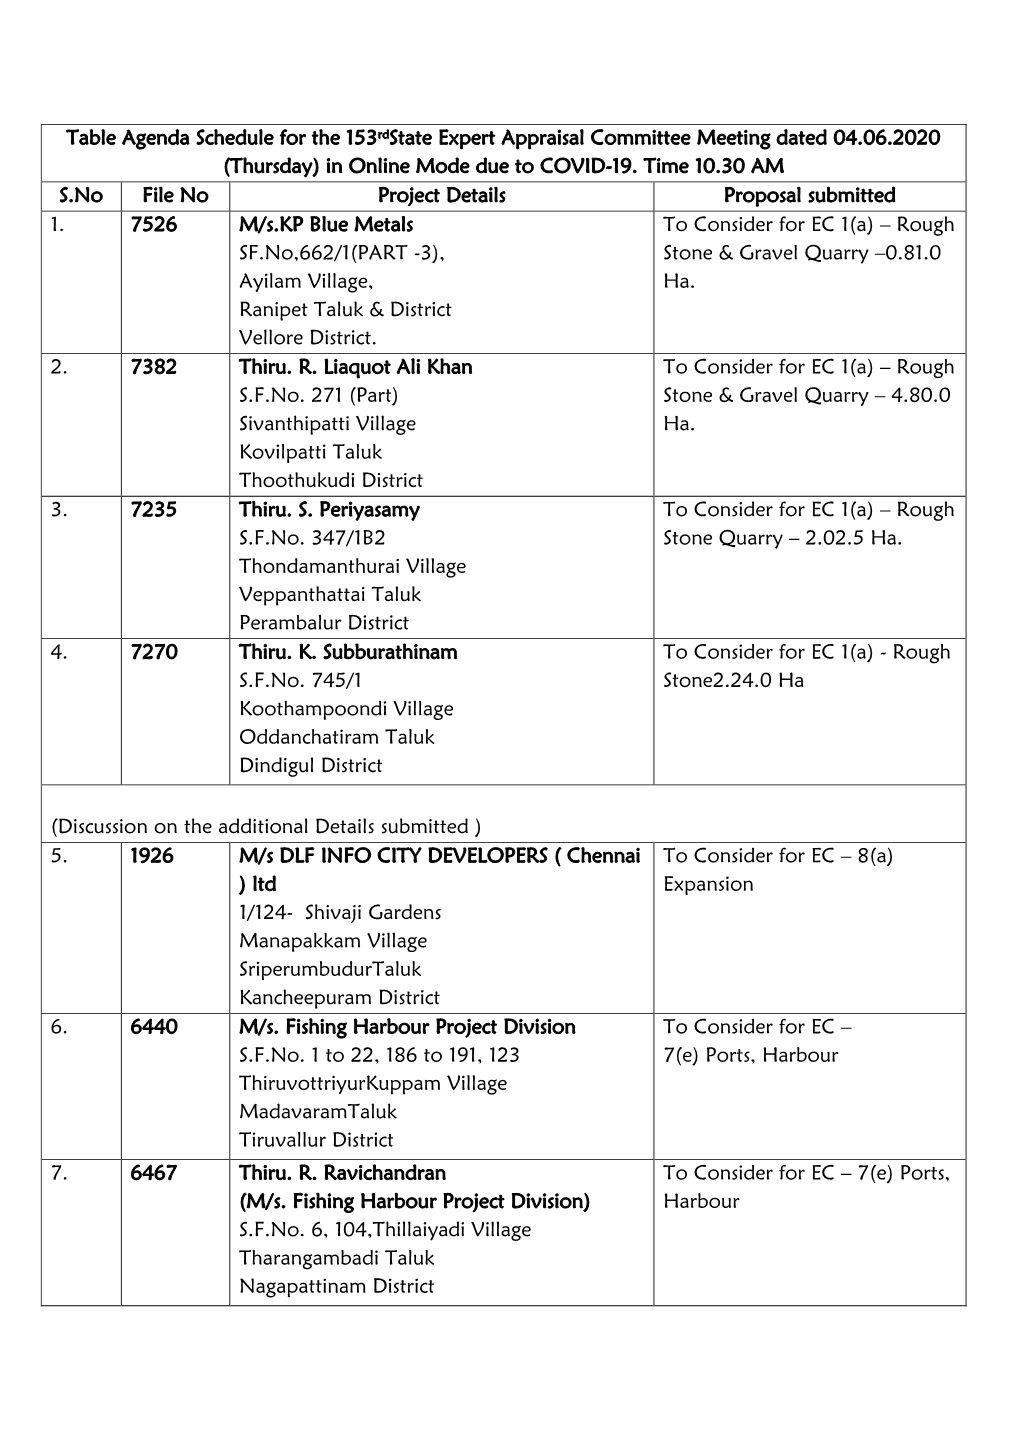 Table Agenda Schedule for the 153Rdstate Expert Appraisal Committee Meeting Dated 04.06.2020 (Thursday) in Online Mode Due to COVID-19